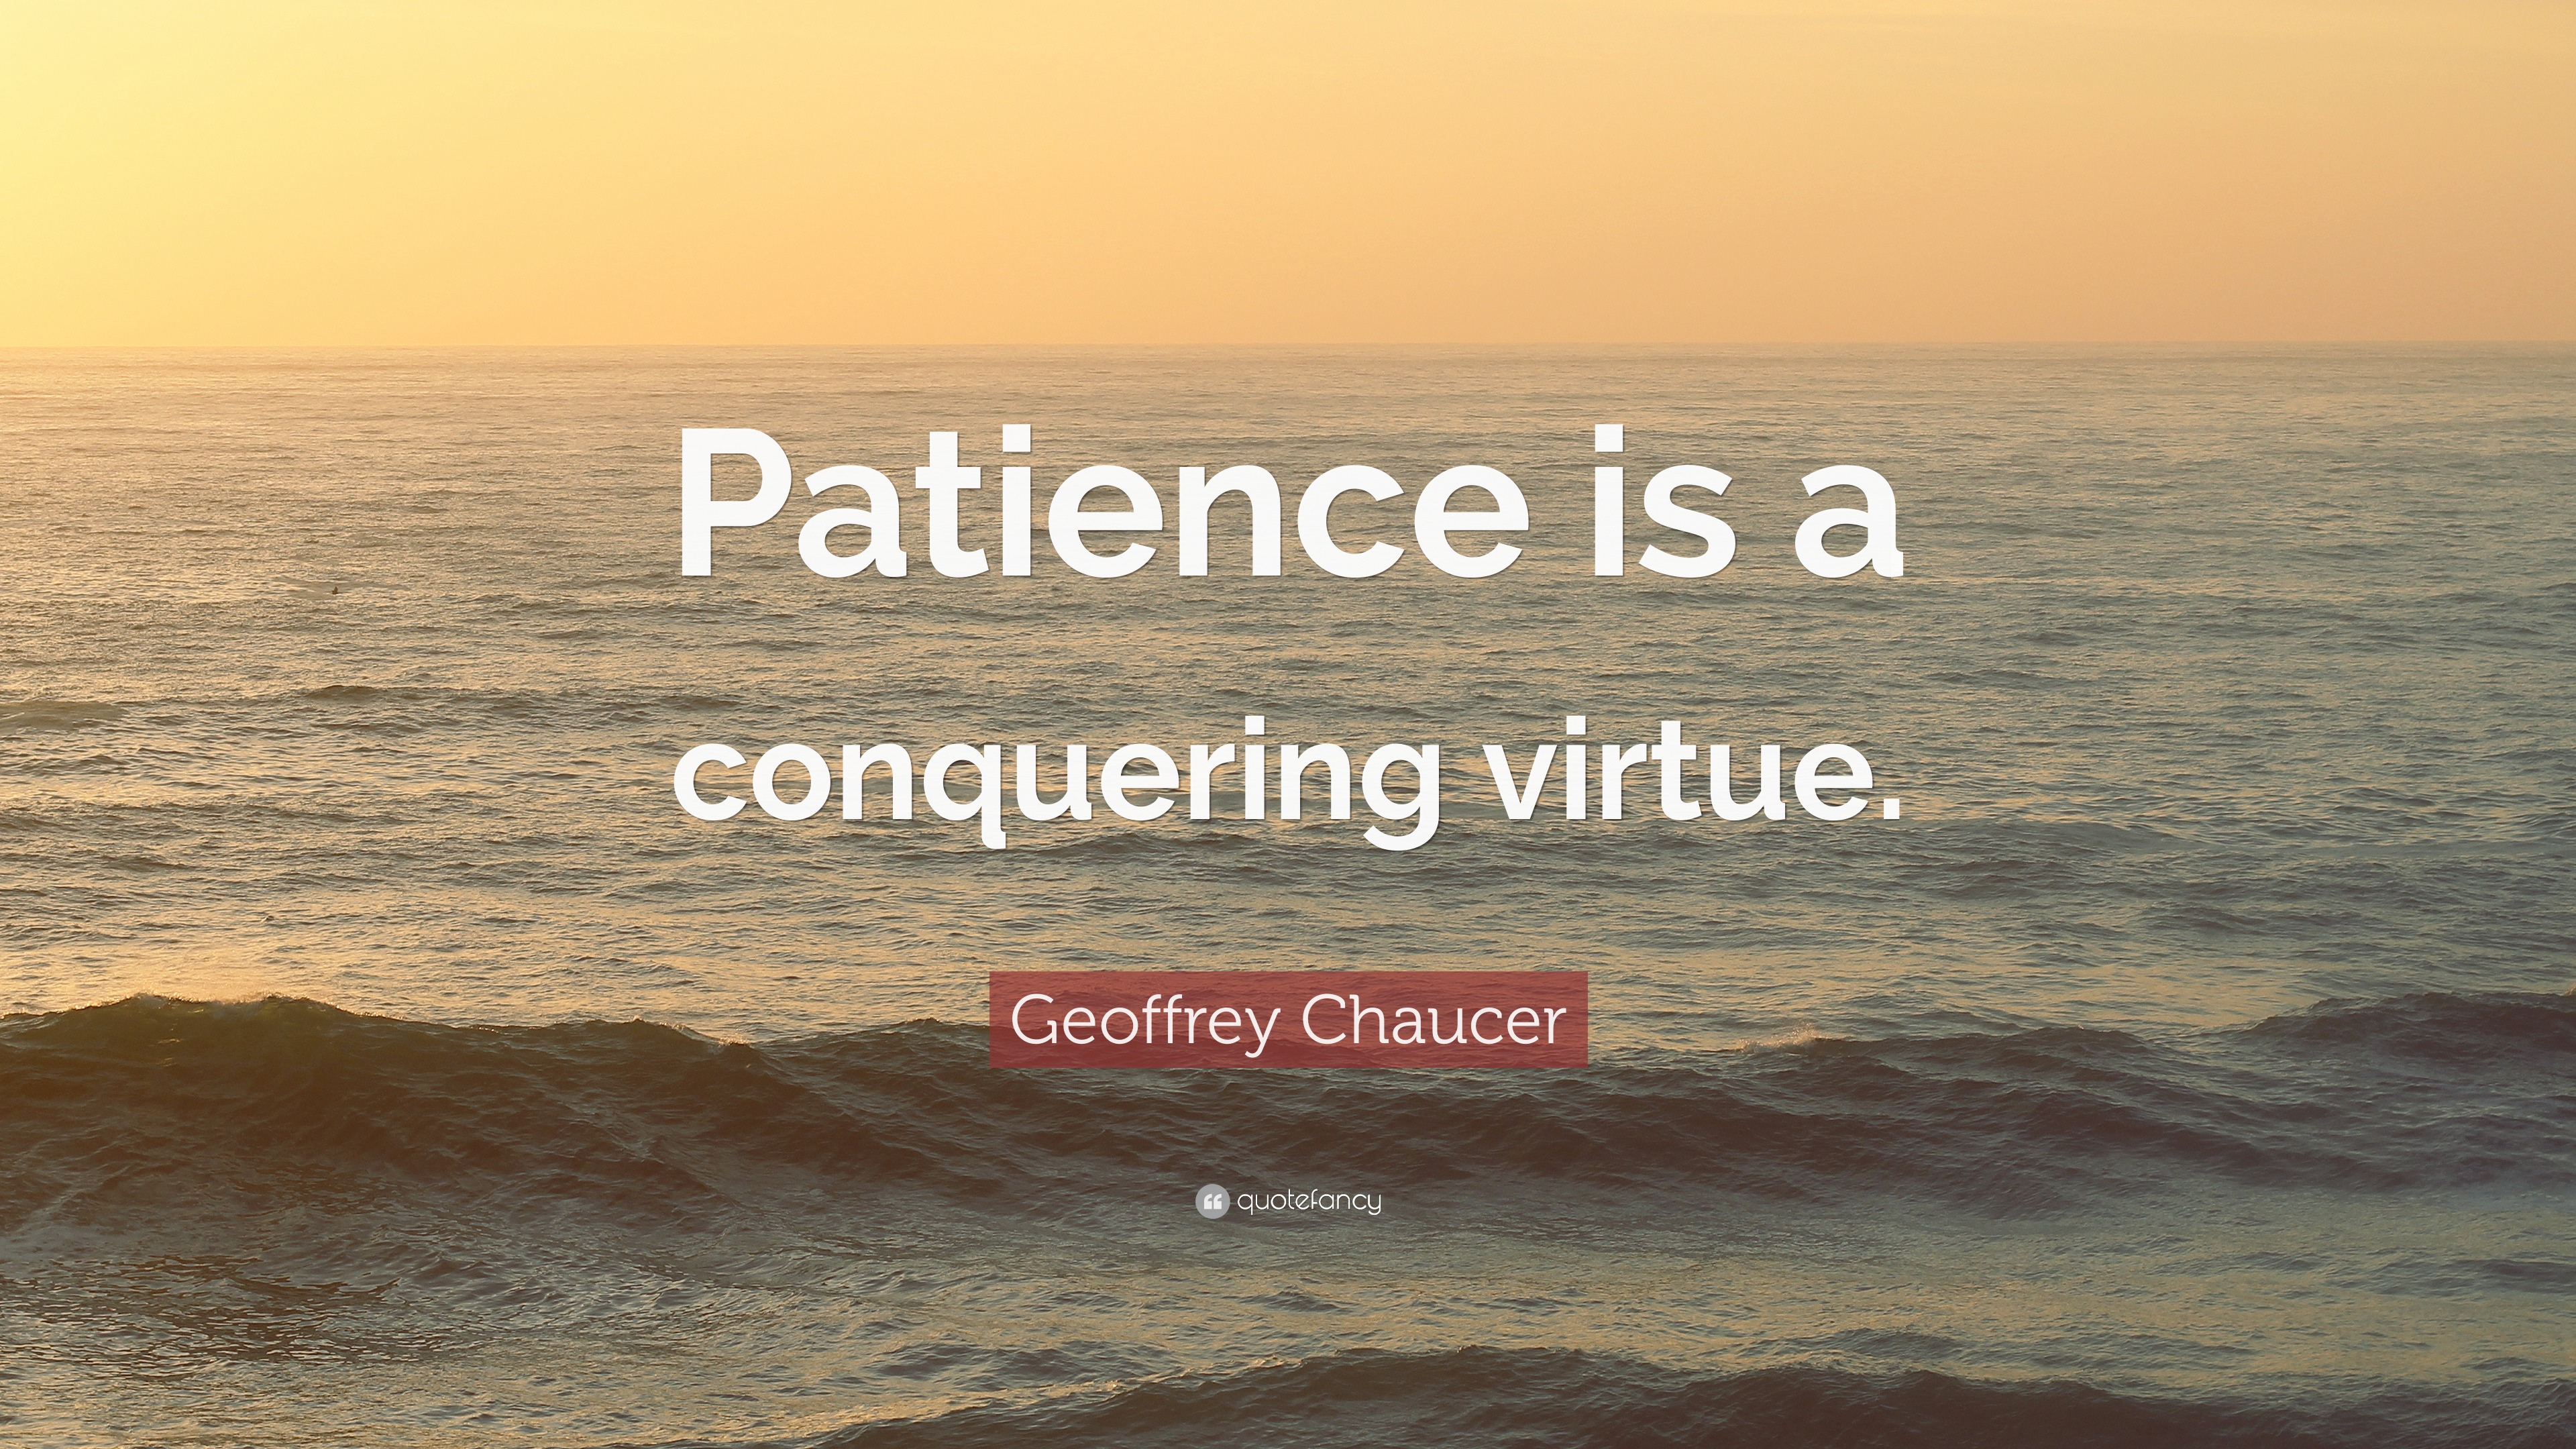 Geoffrey Chaucer Quote: “Patience is a conquering virtue ...